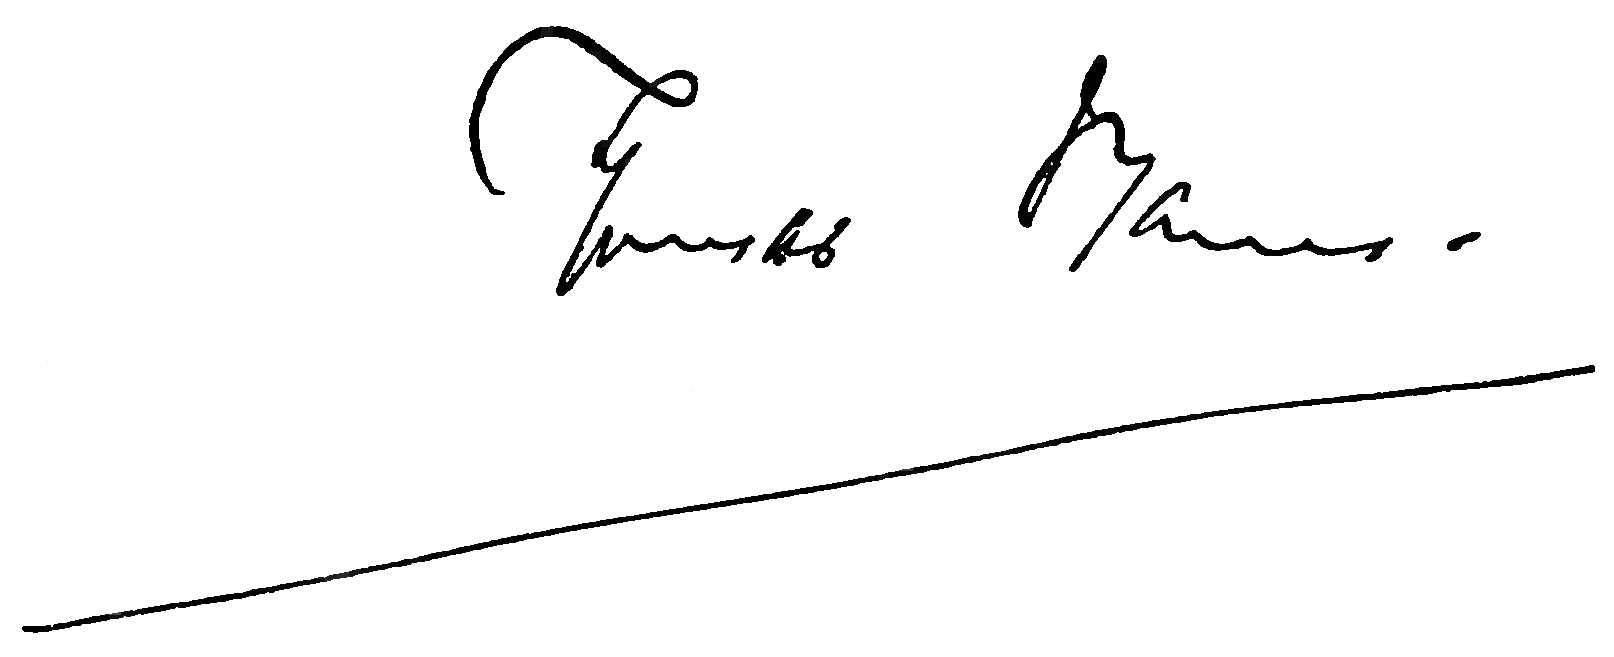 File:Thomas Mann's Signature.png - Wikimedia Commons